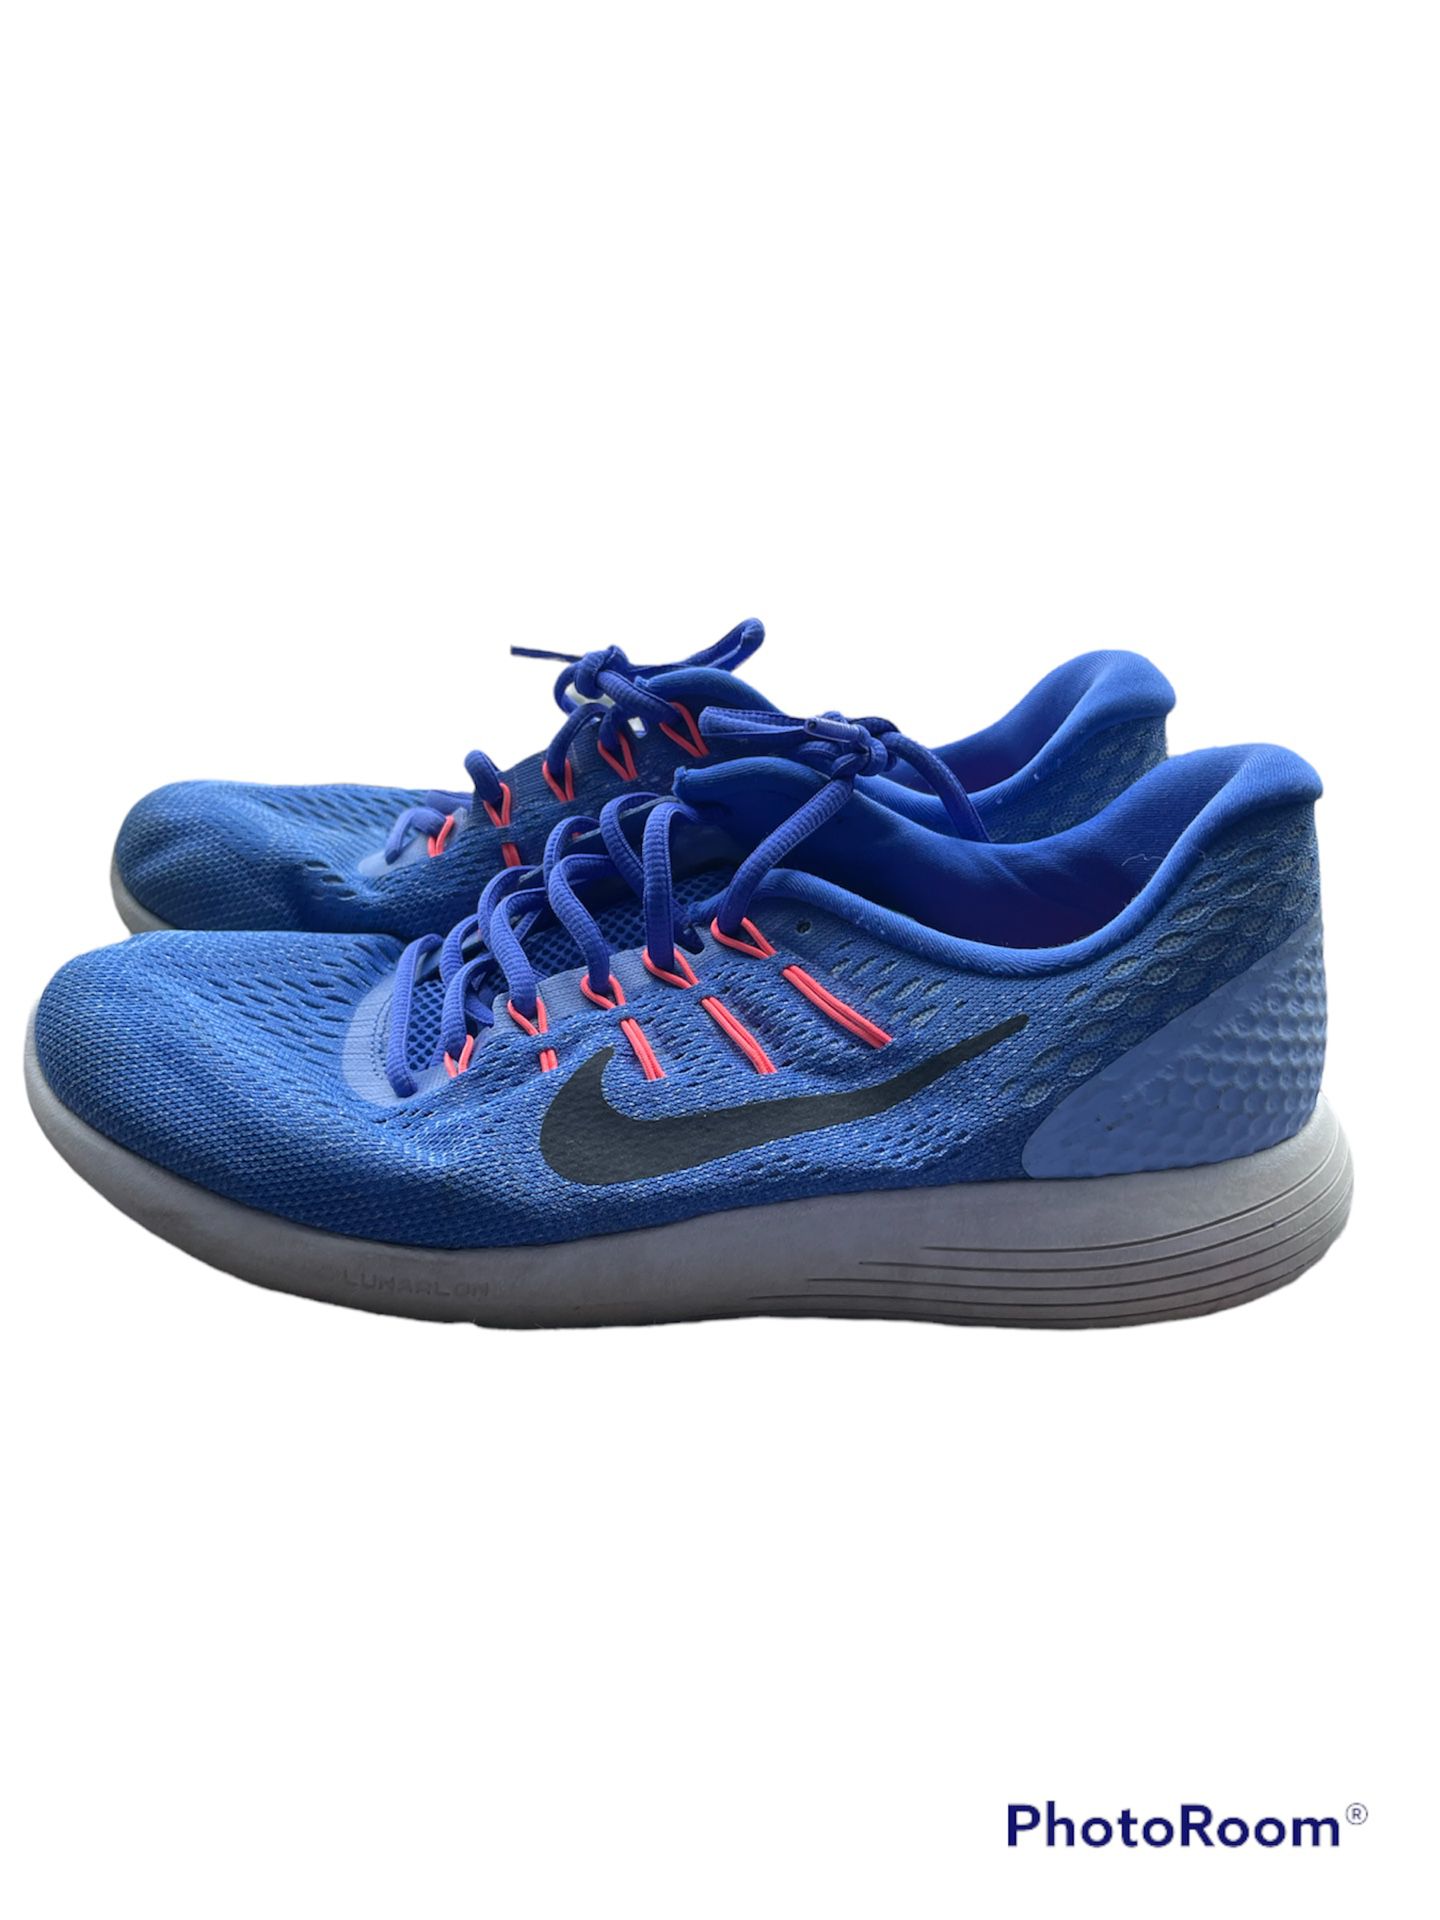 Womens Lunarglide 8 Running Shoes Size 10.5 Blue Pink Synthetic AA8677-406 for Sale in West Orange, NJ - OfferUp